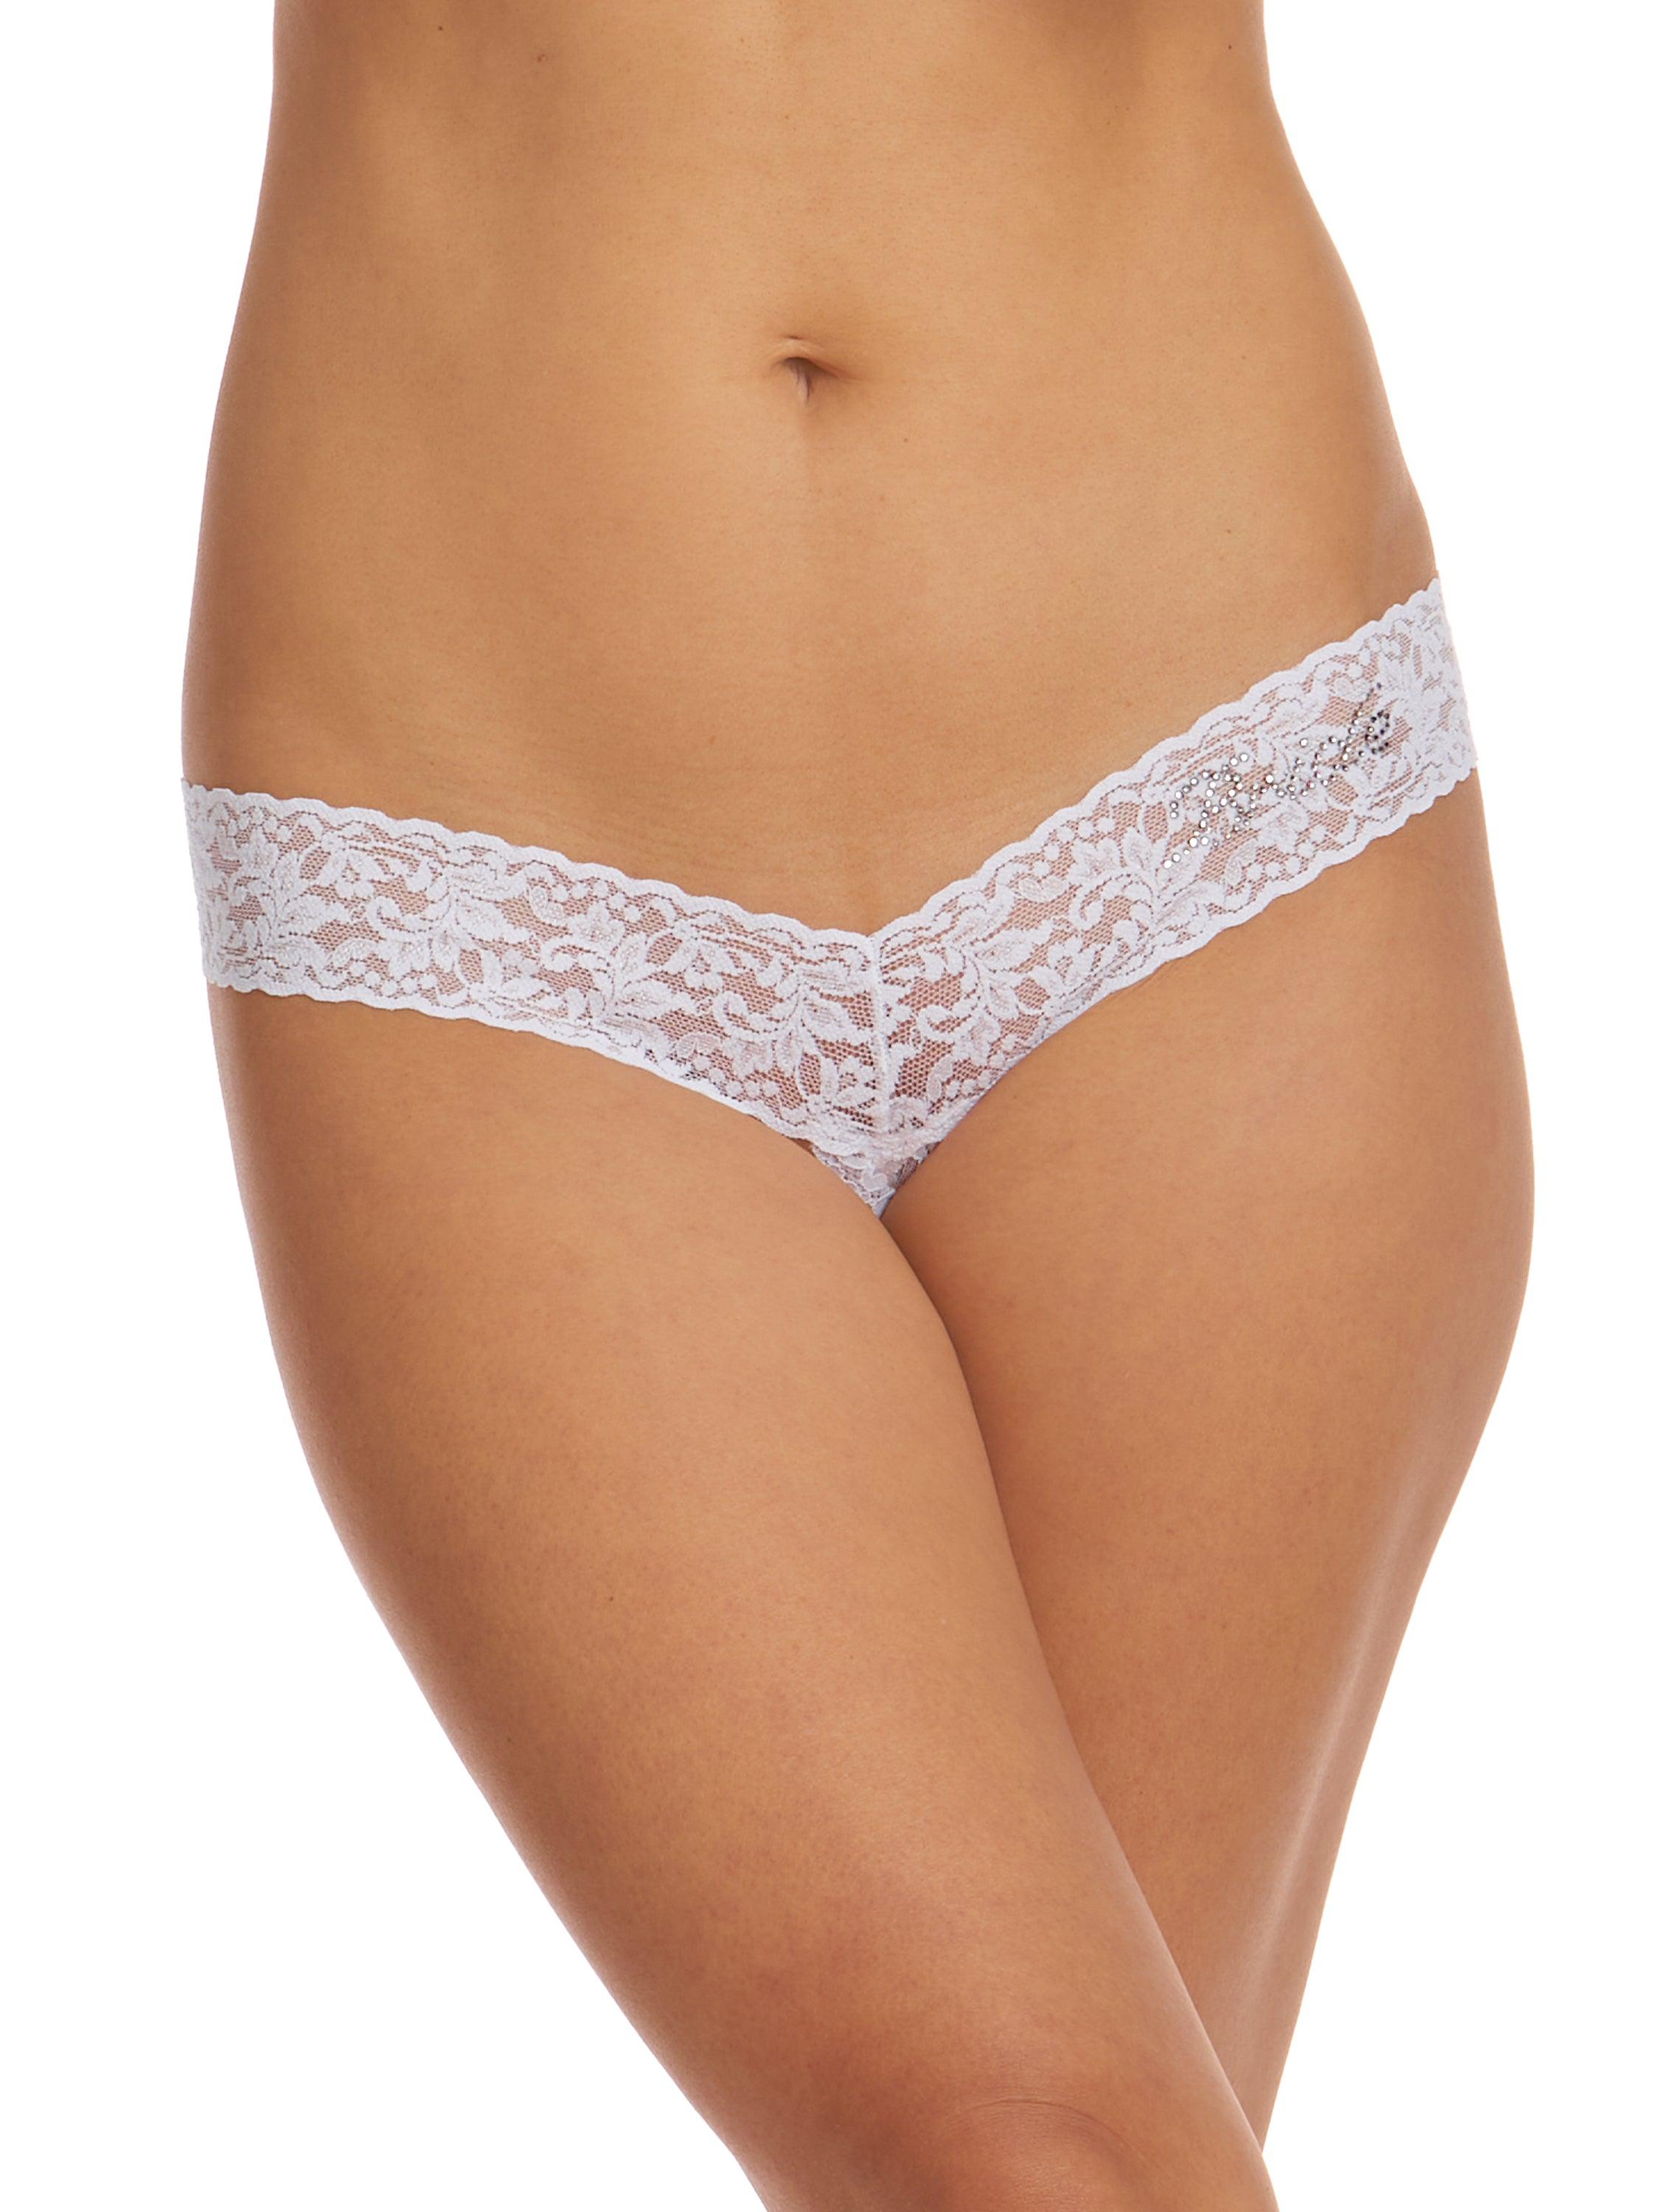 1PC White Women Lace Panties Crotchless Underwear Thongs Lingerie